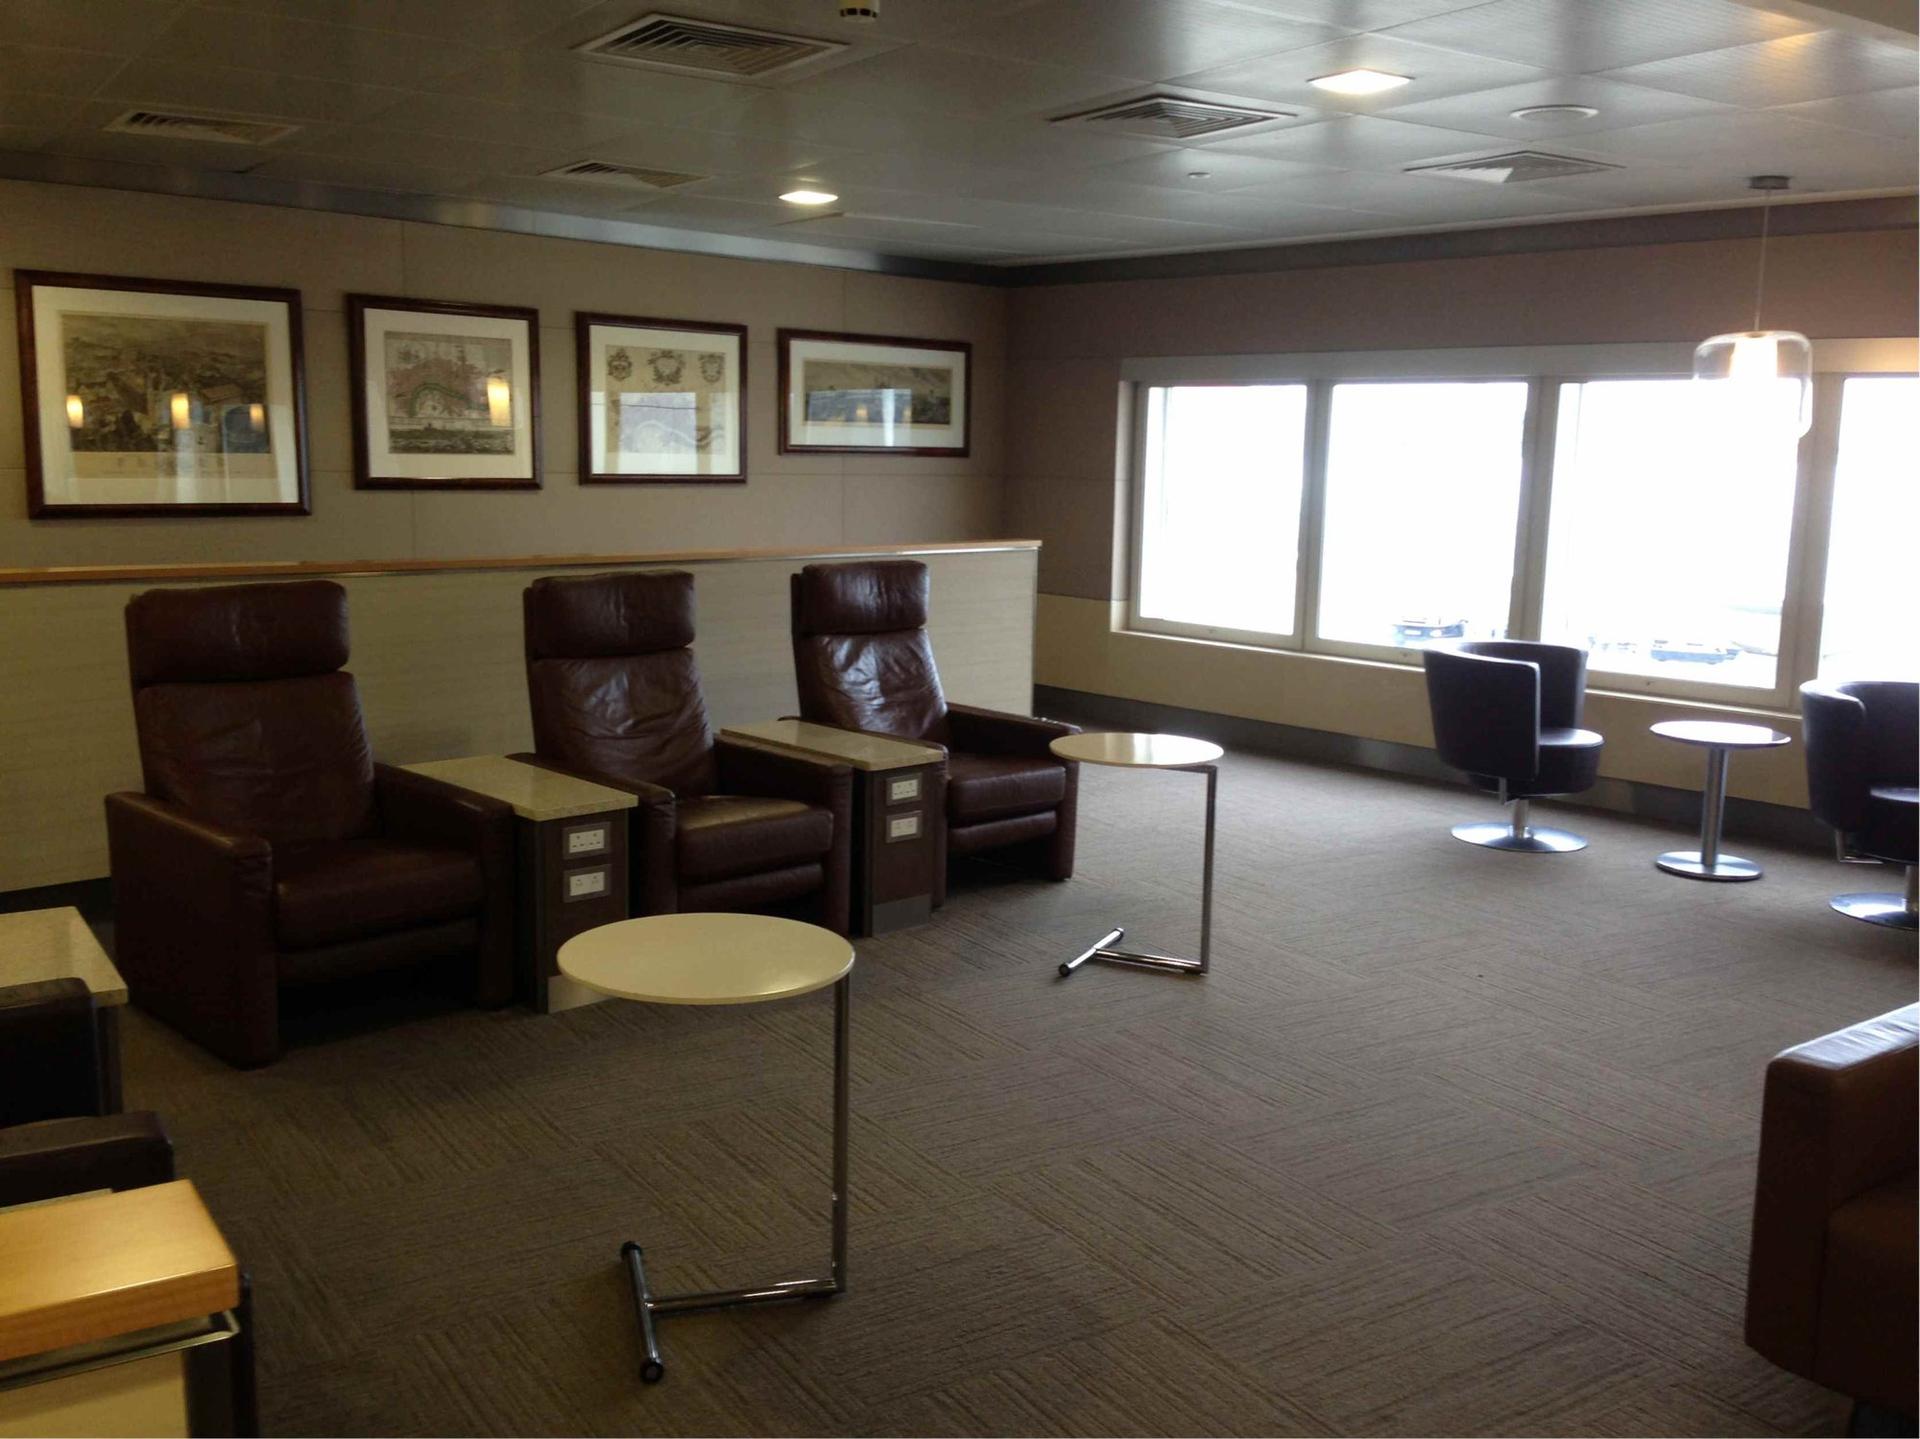 American Airlines International First Class Lounge image 6 of 16